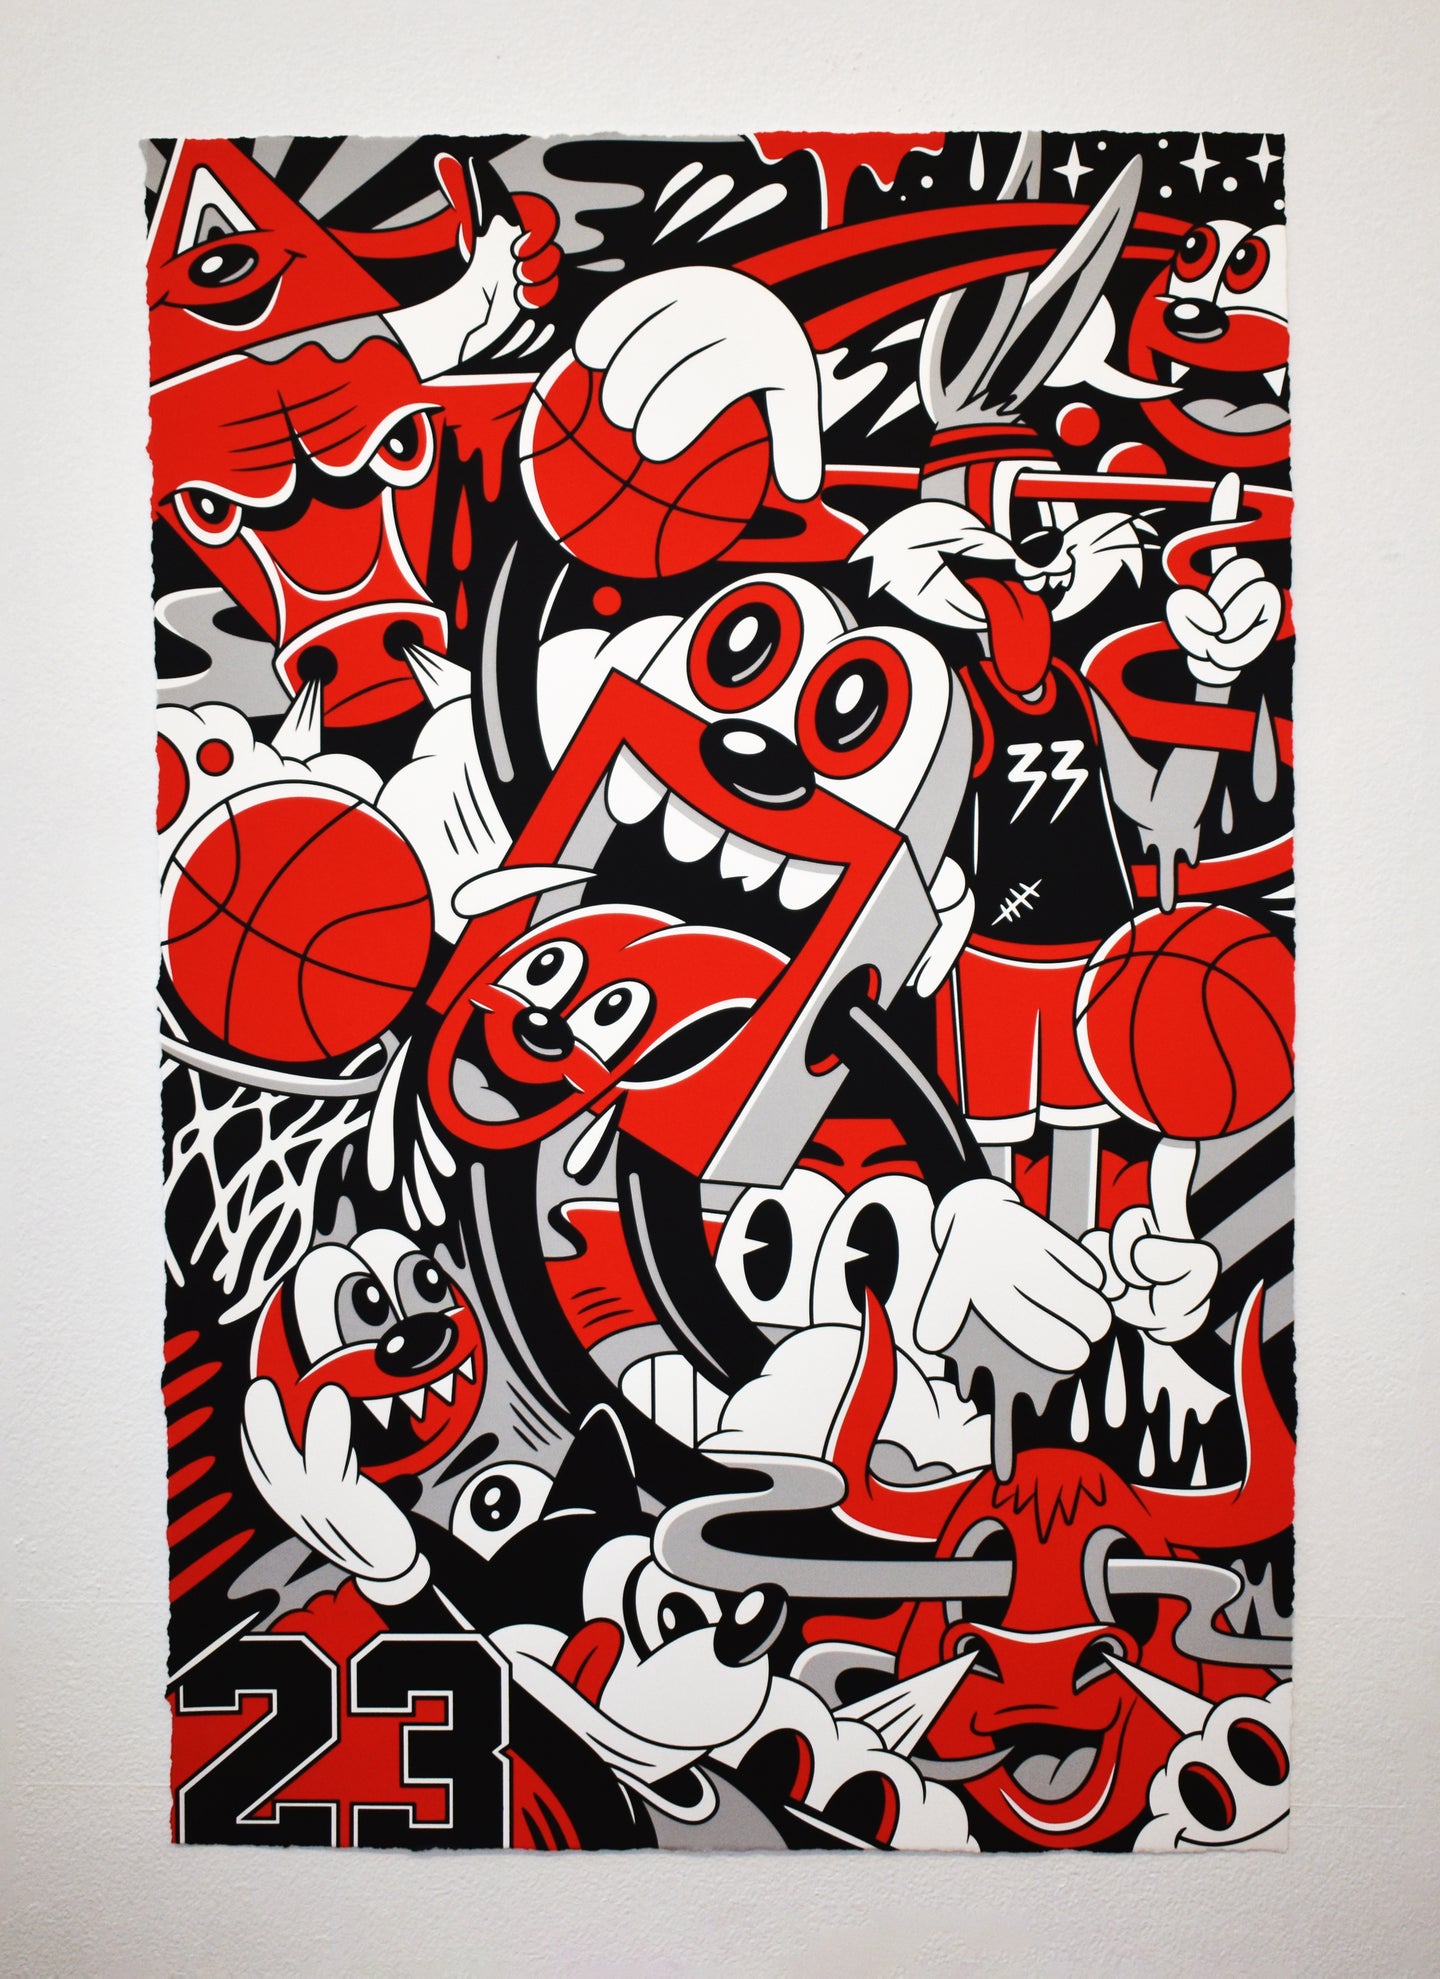 “Hang Time” Screen Print by Greg Mike